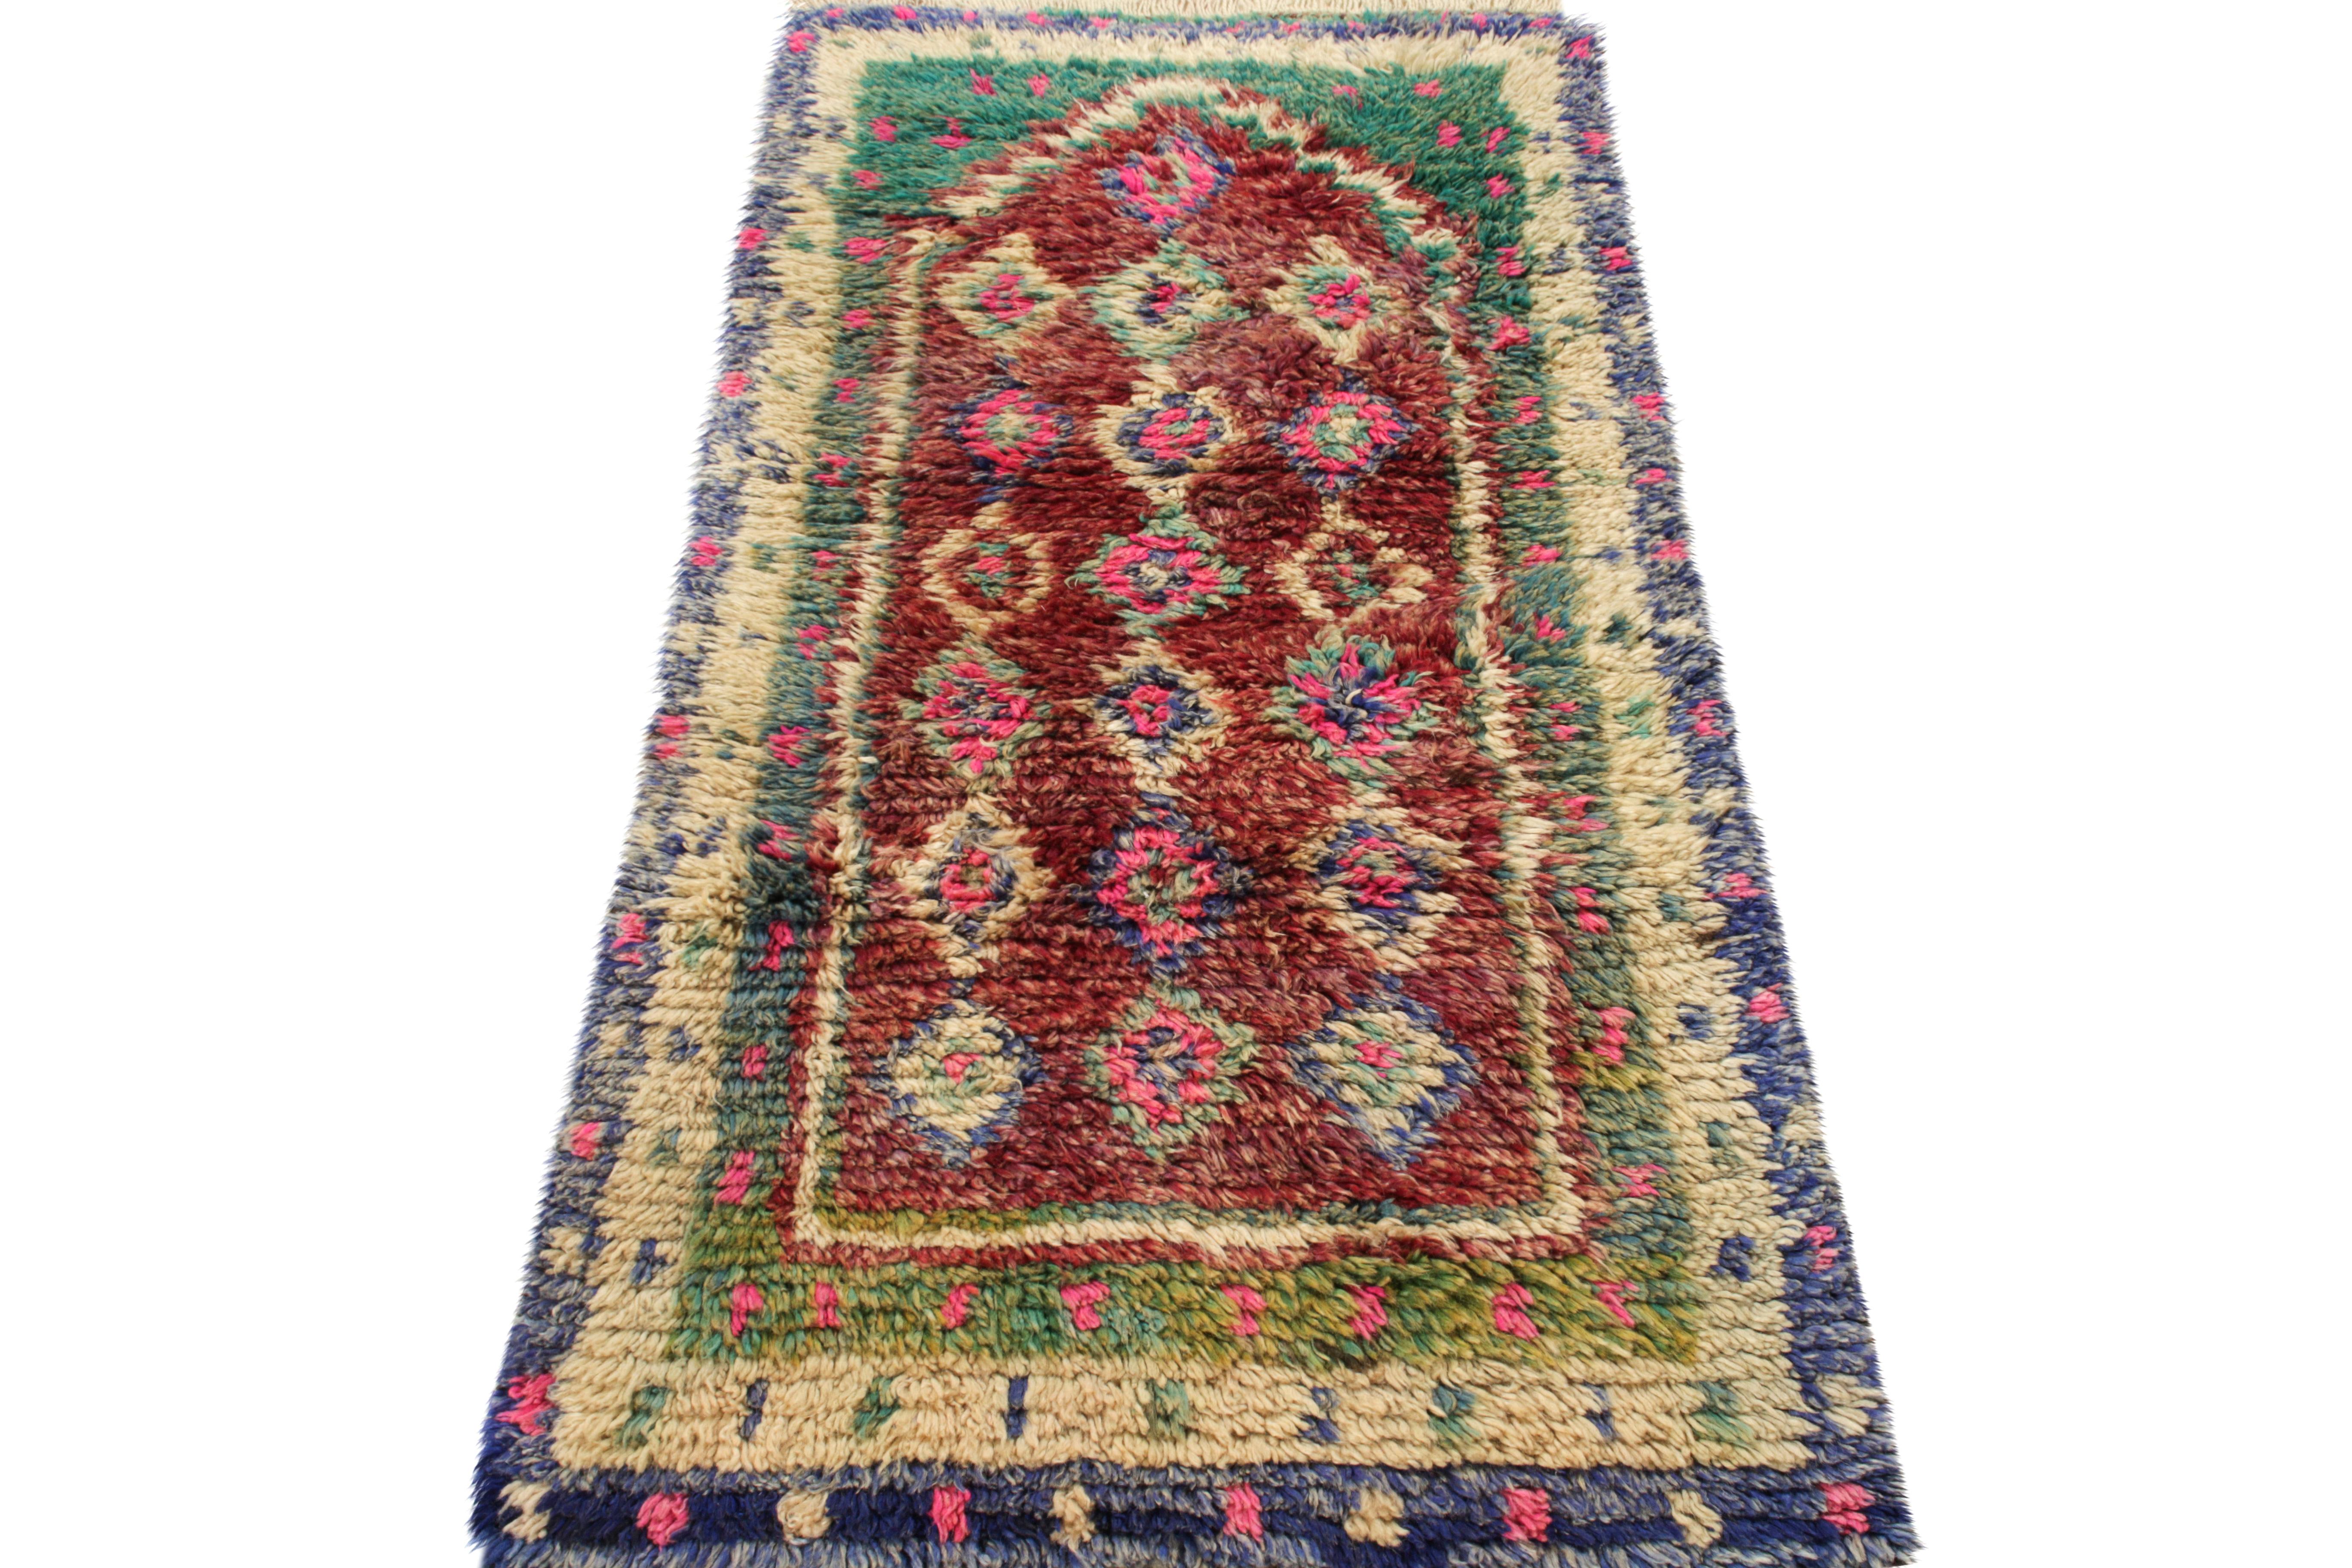 Hand-knotted in lush, quality wool circa 1950-1960, this 3x5 Turkish vintage Tulu rug enjoys the ruggedness of nomadic patterns in an unusual multicolor pattern—seldom seen in this lineage before with this particular, almost Moroccan tribal